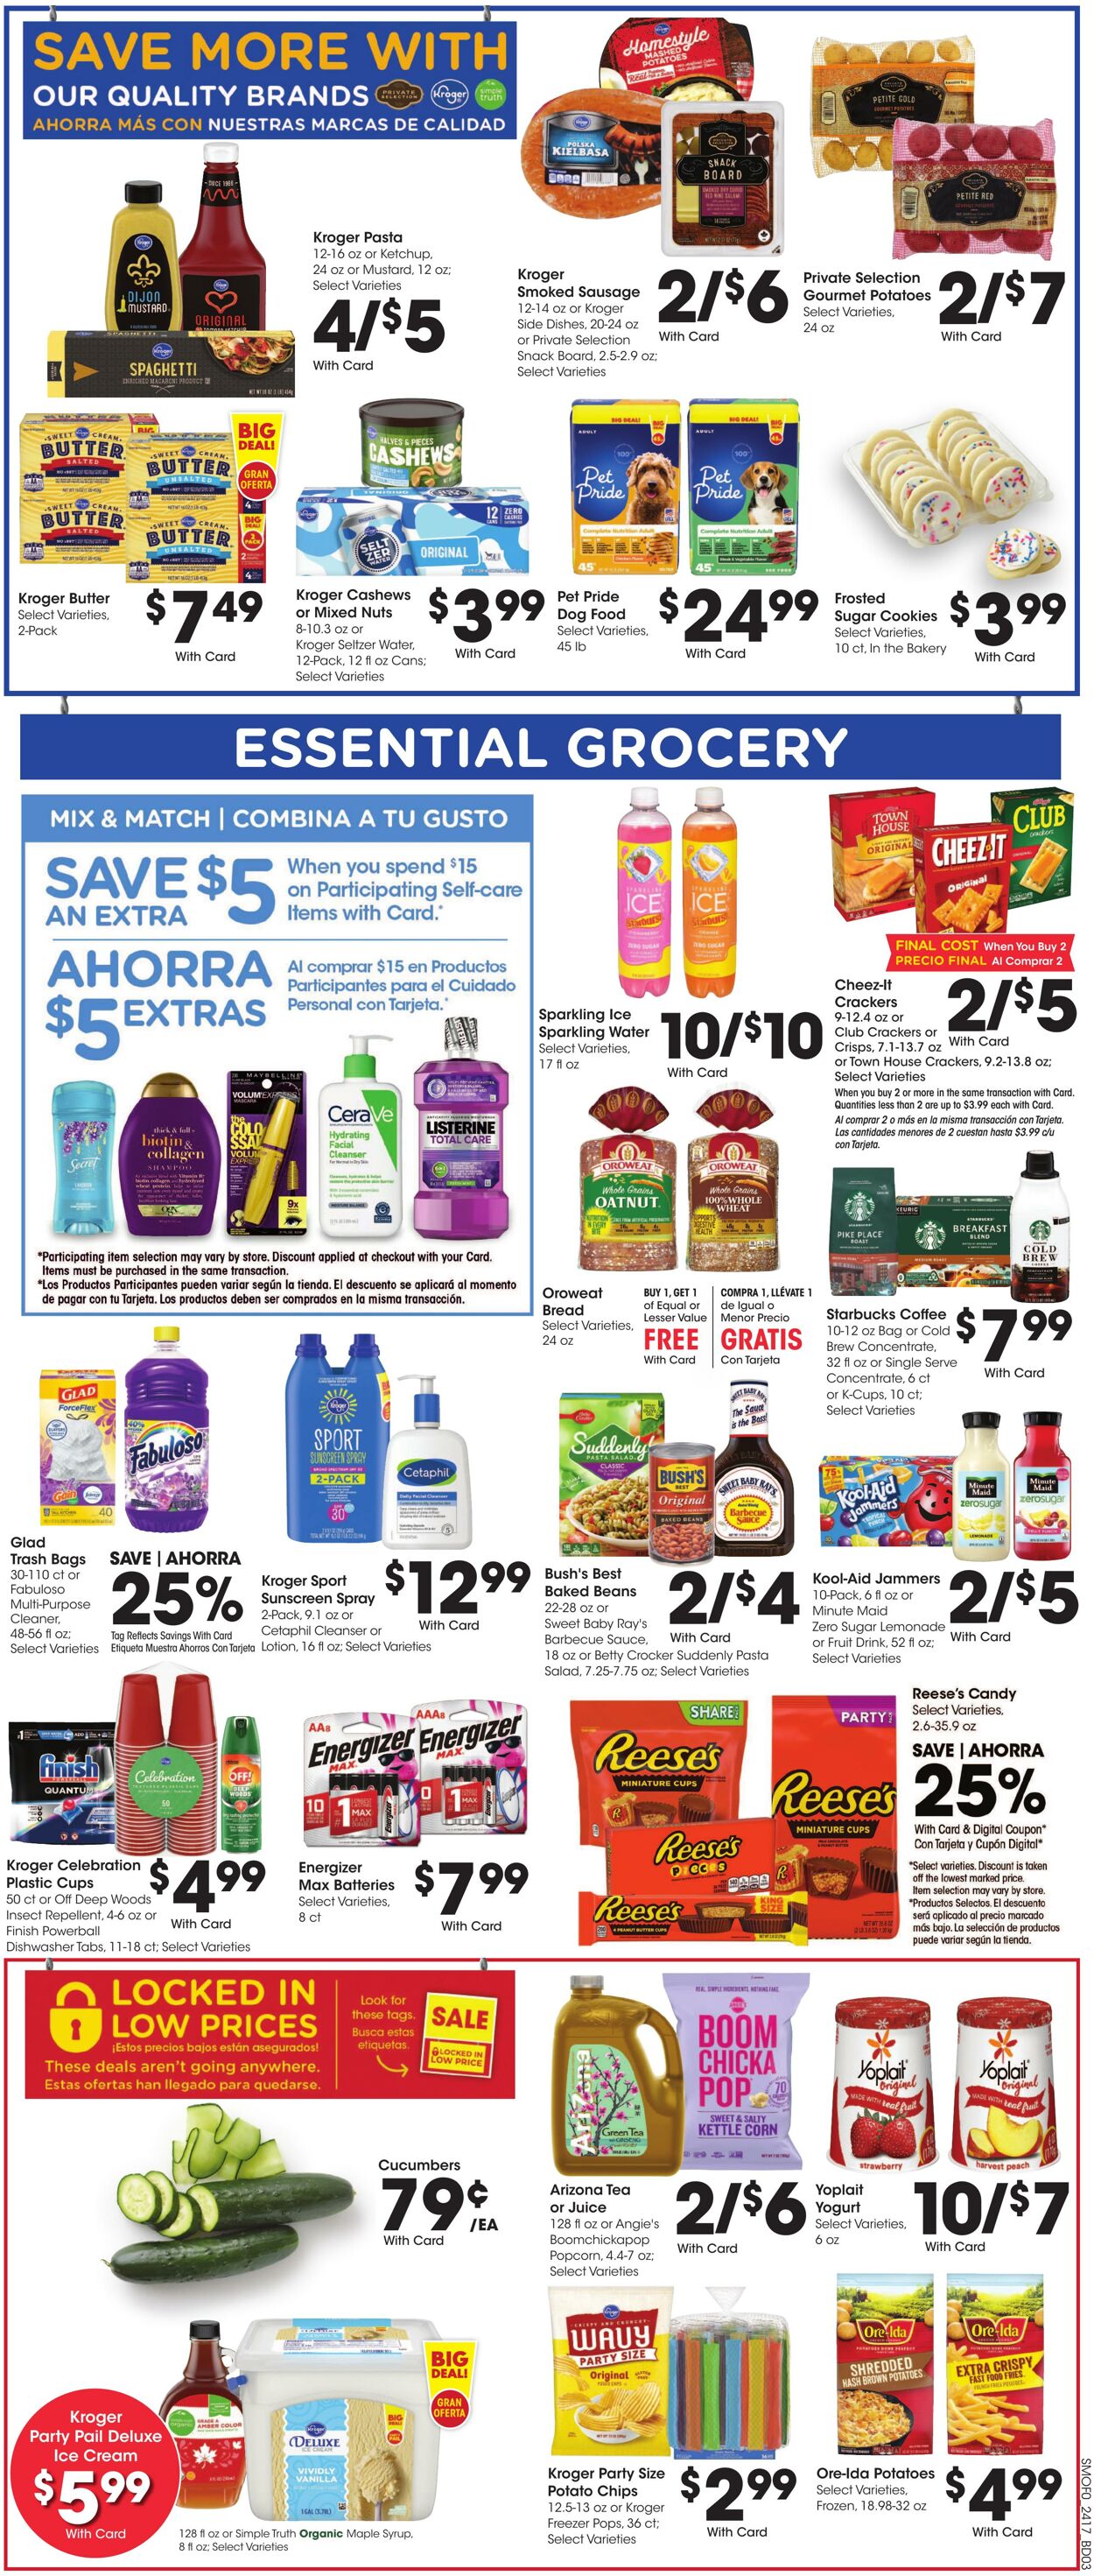 Weekly ad Smith’s Food and Drug 05/29/2024 - 06/04/2024